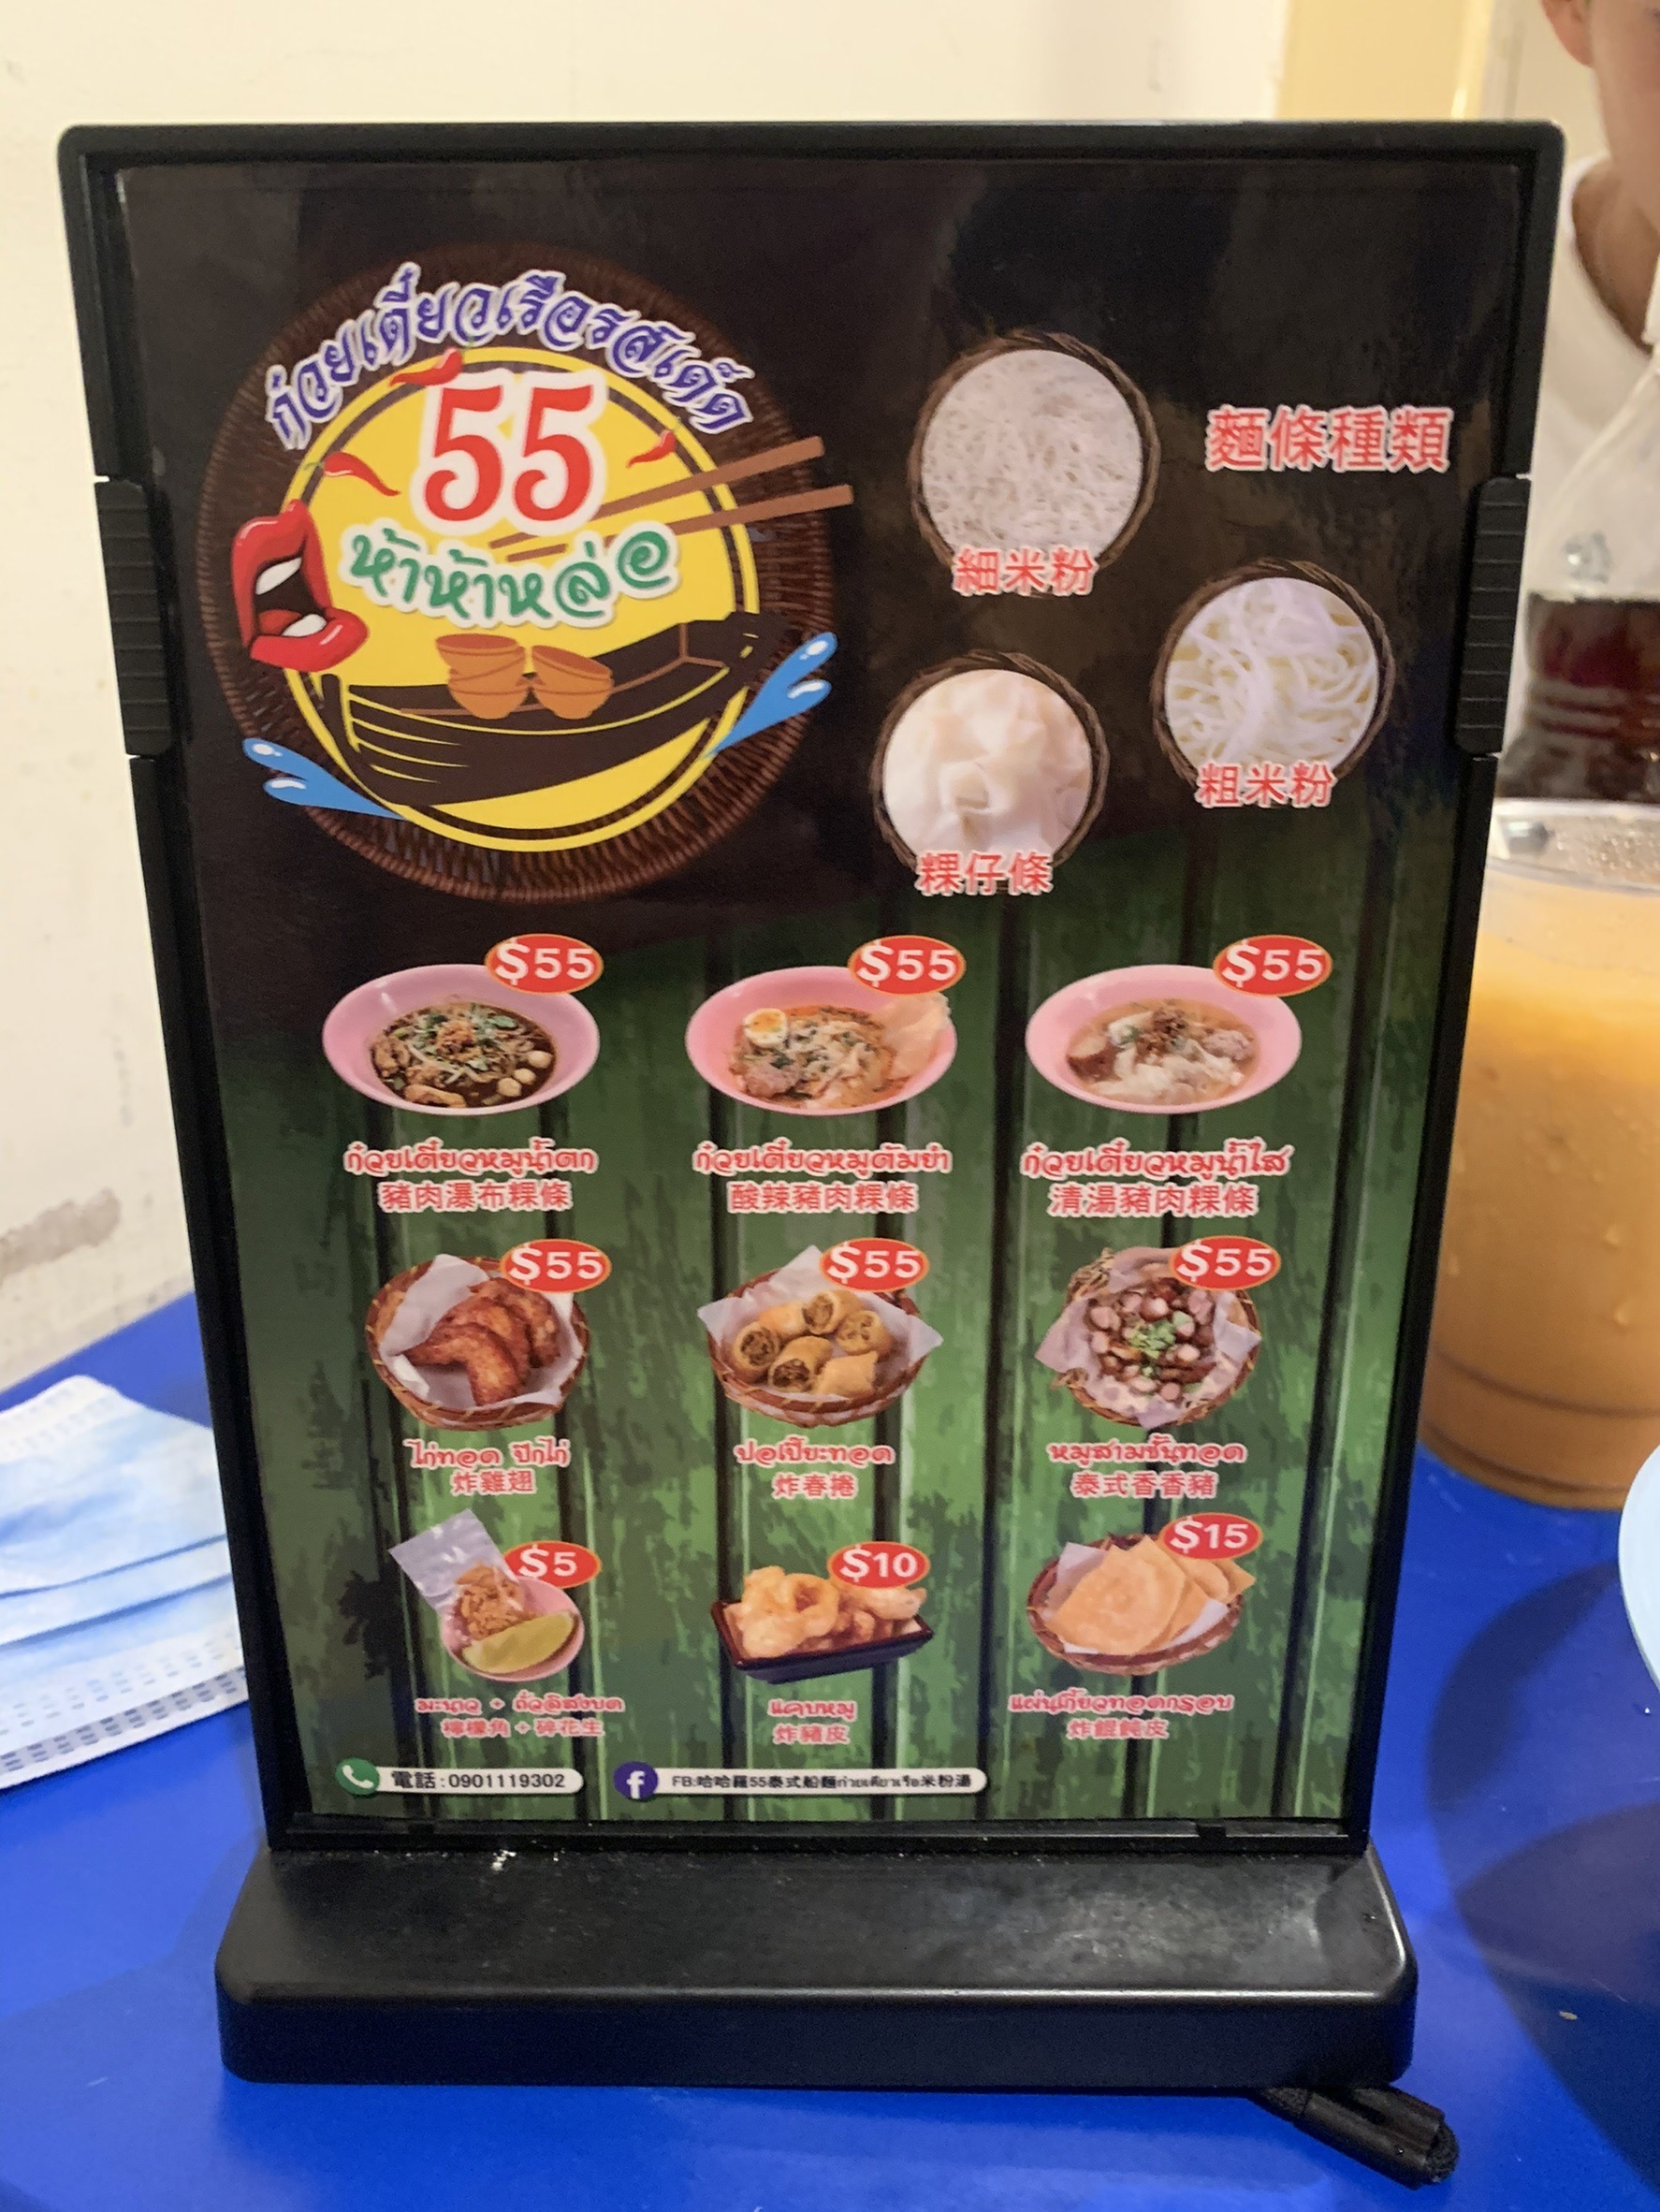 The menu from Hahlo 55 Boat Noodles. (Photo courtesy of Taiwan Immigrants’ Global News Network)